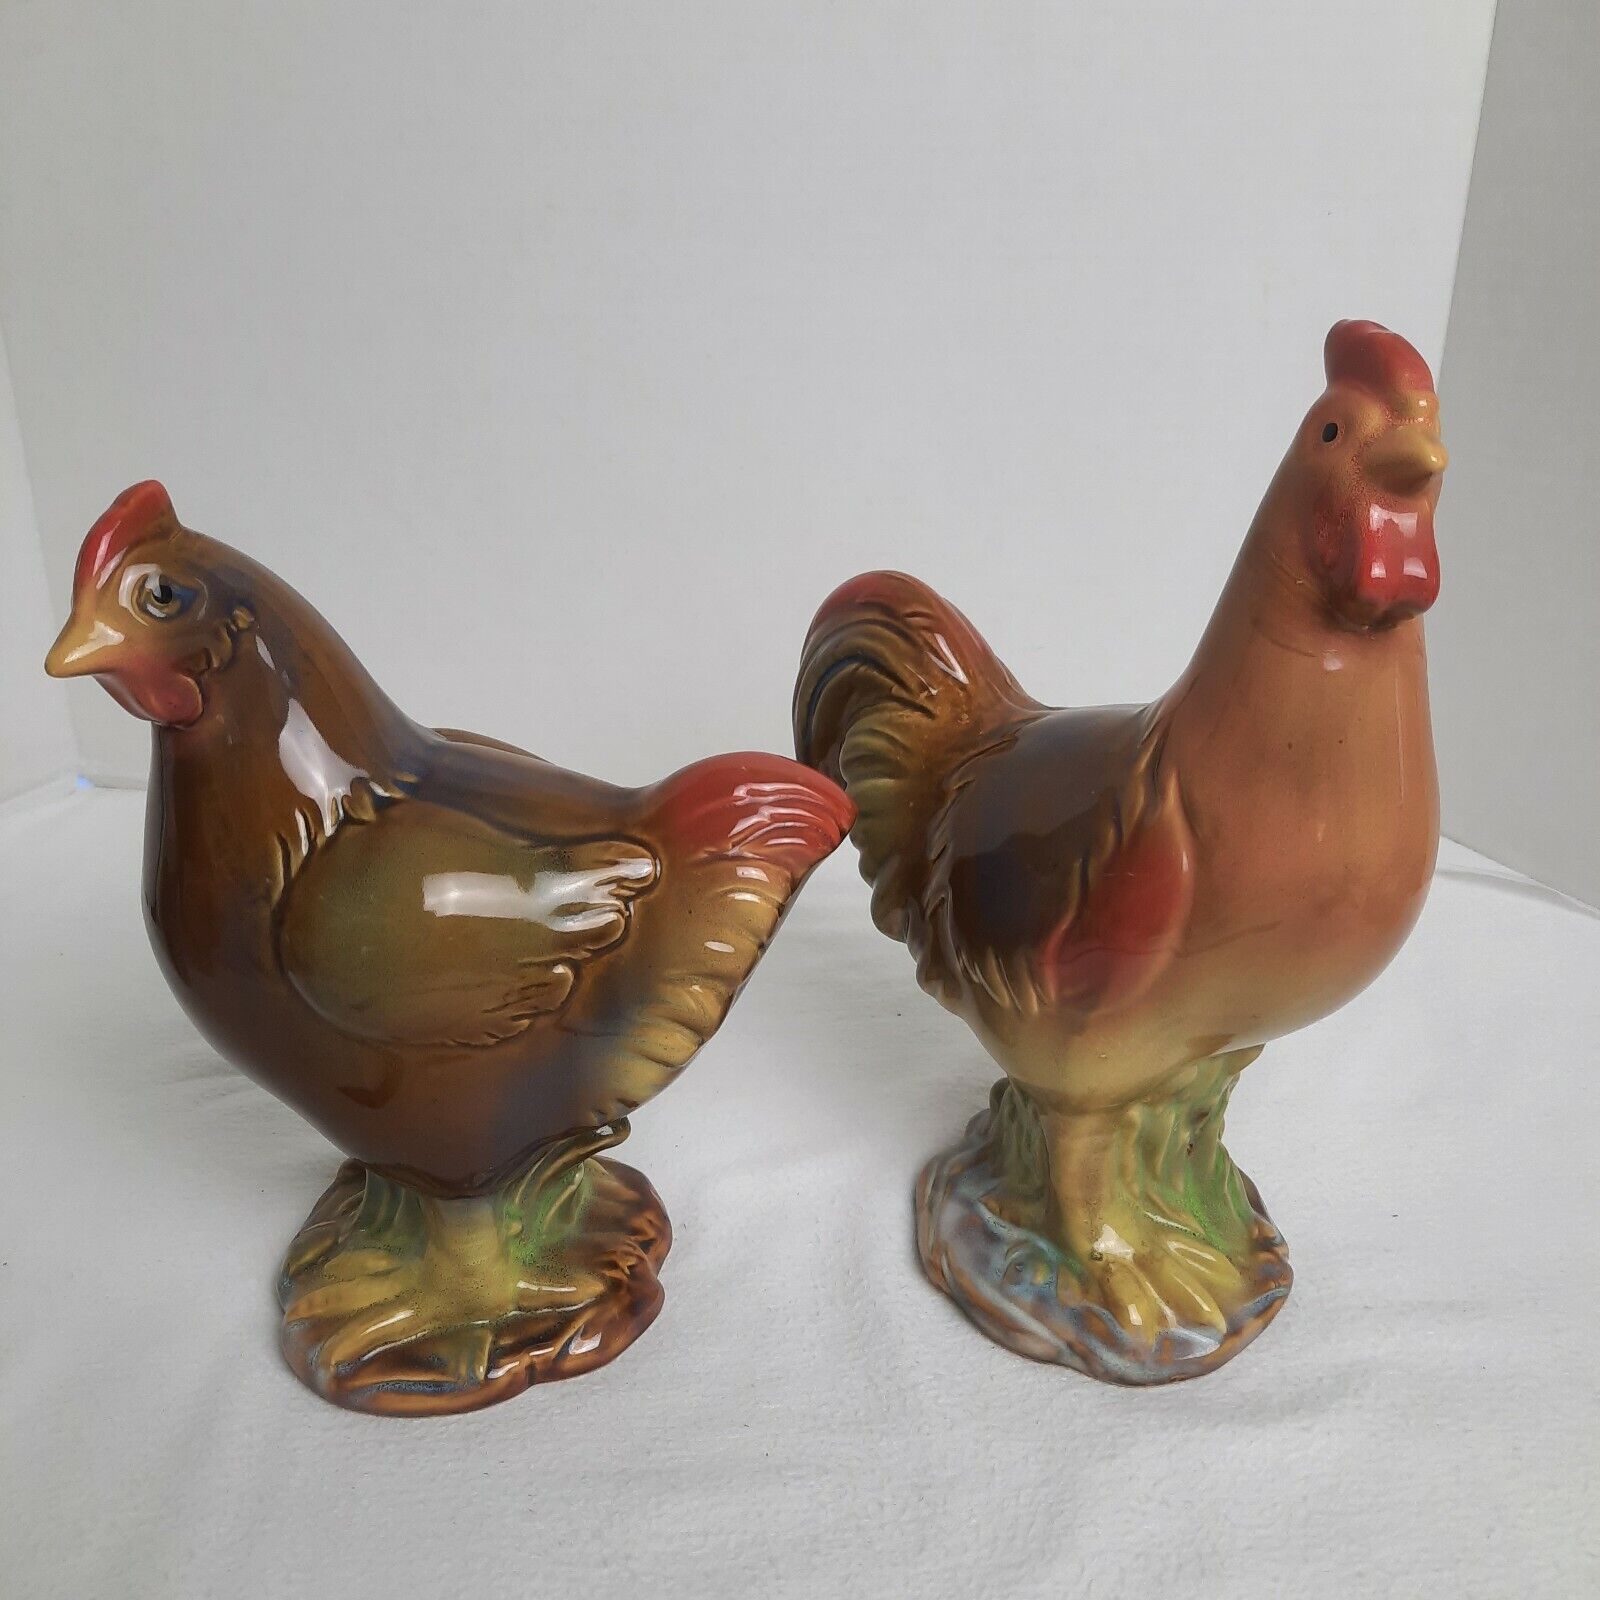 Vintage Standing Glazed Porcelain Hen/Rooster Figurines FARMHOUSE COUNTRY DECOR